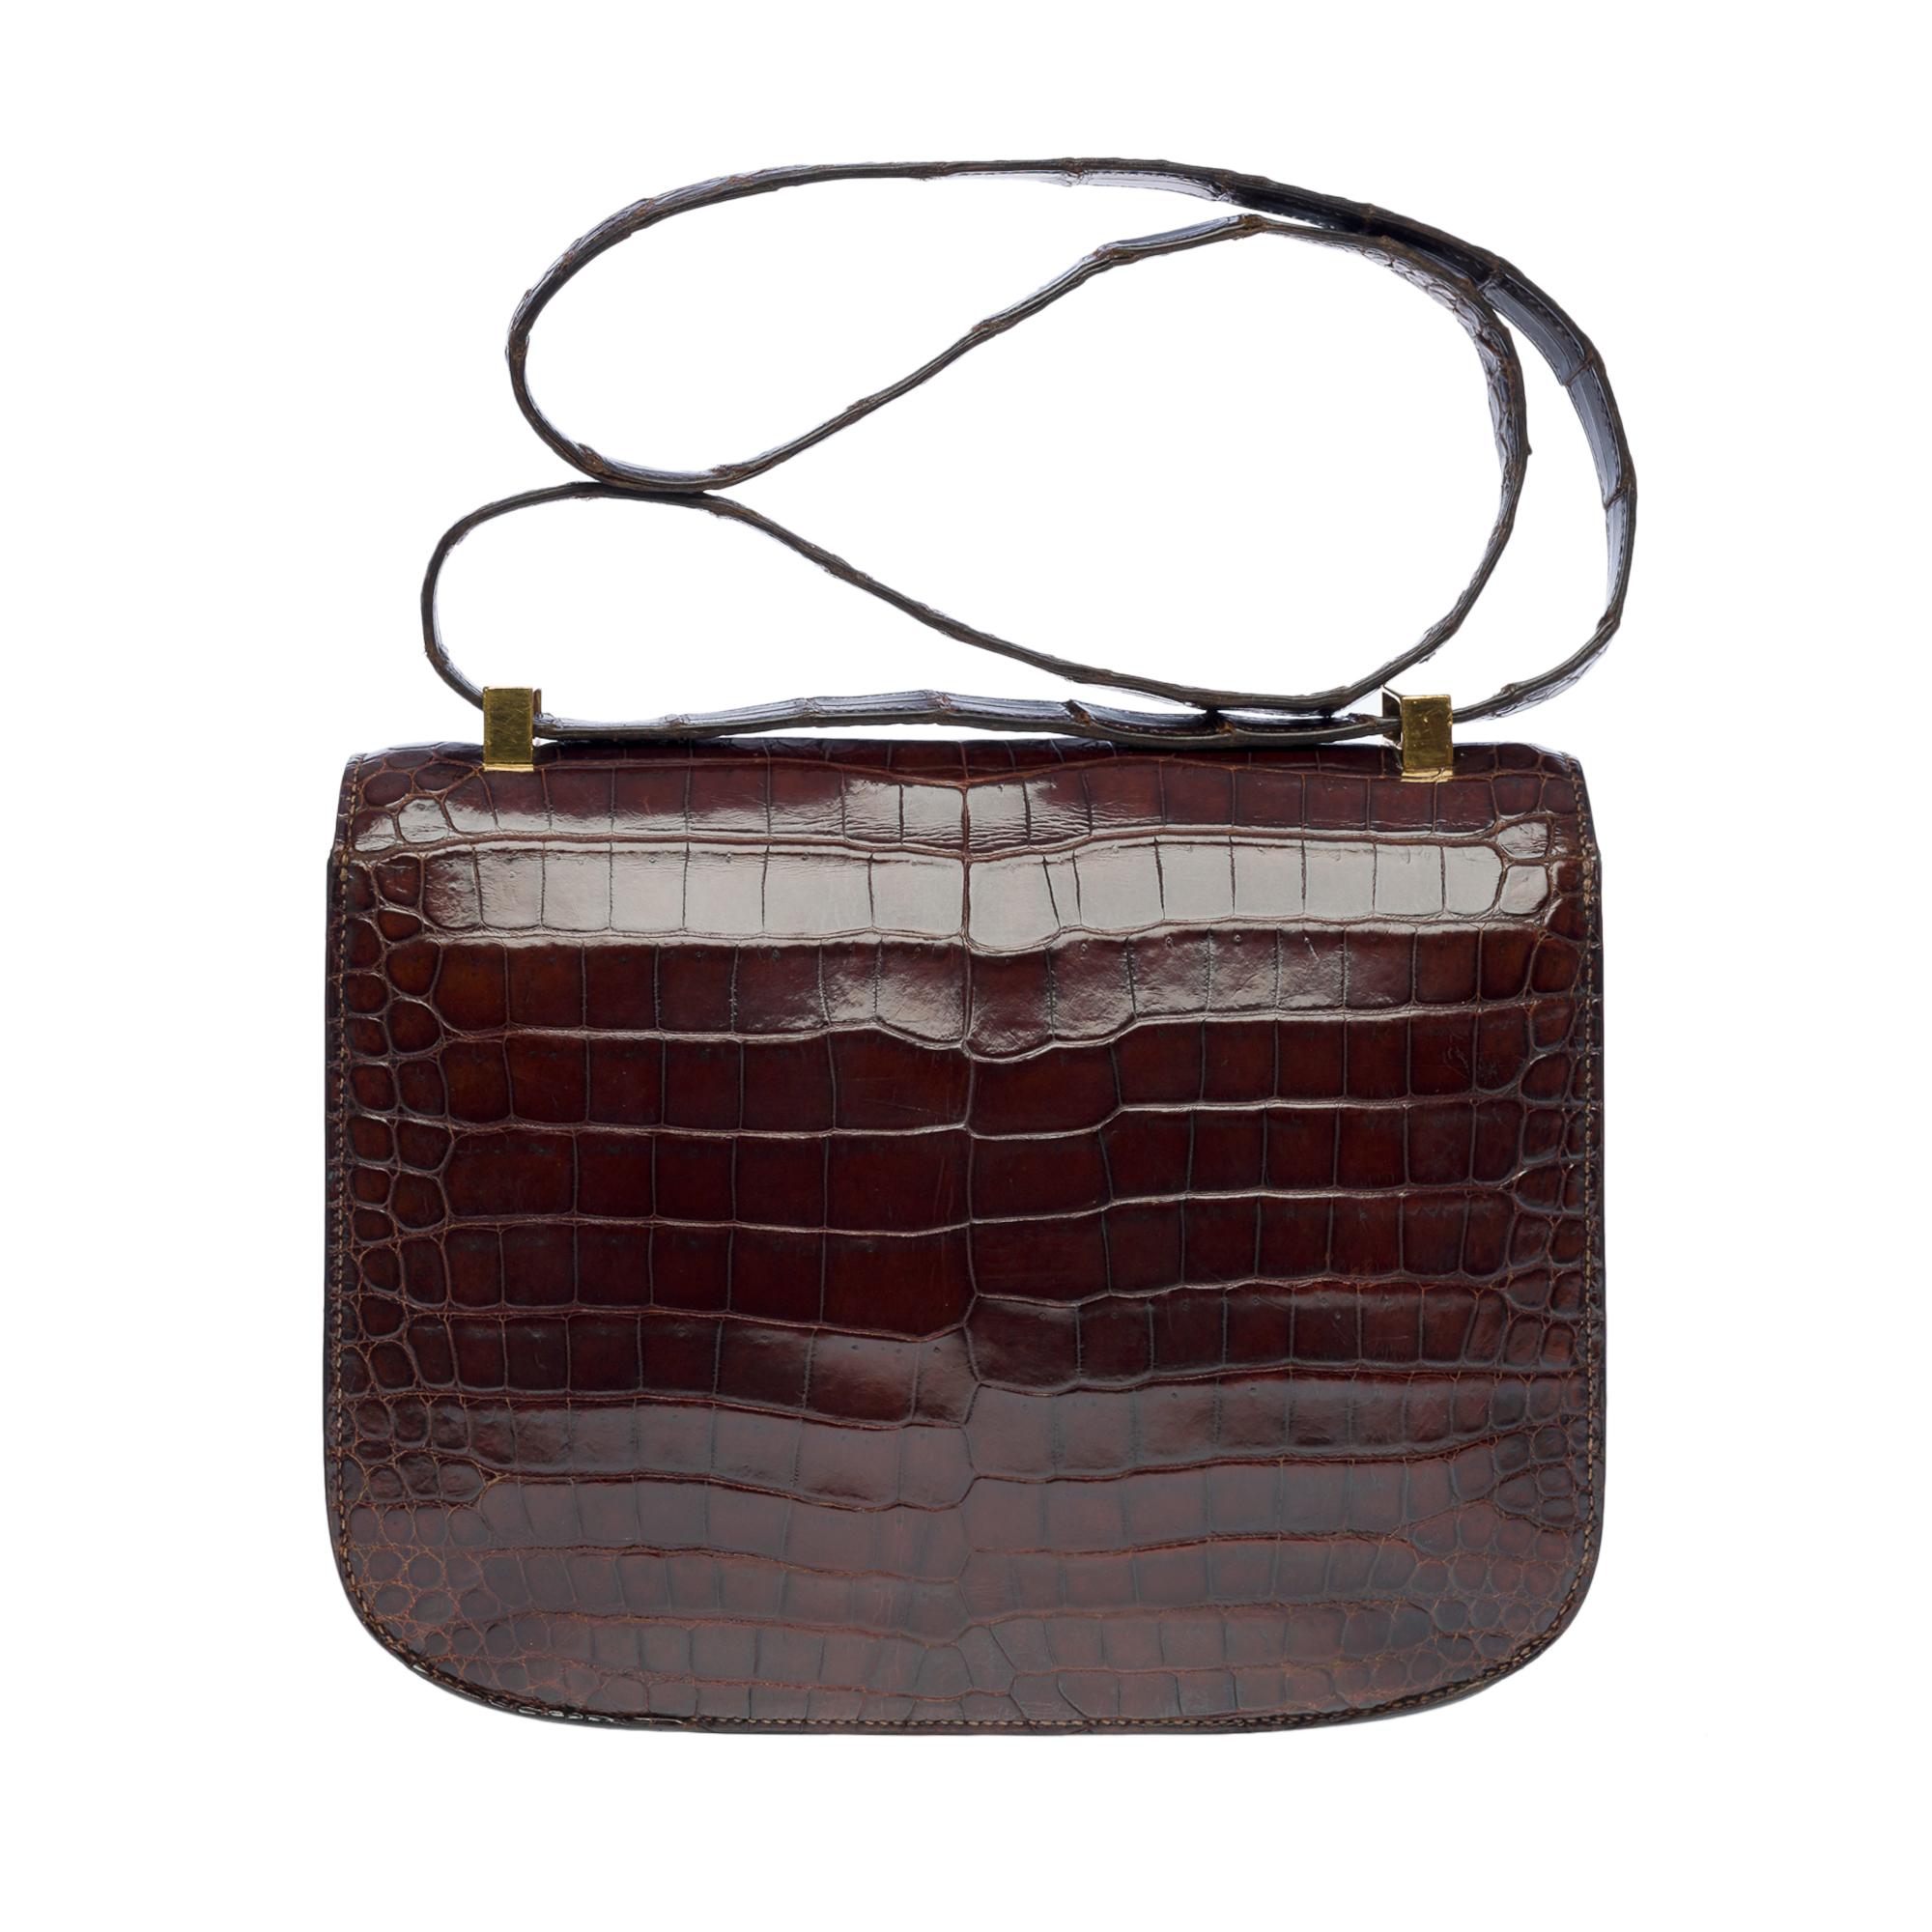 Gorgeous Hermes Constance Brown Porosus Crocodile shoulder bag, gold plated metal hardware, convertible handle in brown crocodile for hand or shoulder support

Fastener with logo on flap
A patch pocket on the back of the bag
Inner lining in brown